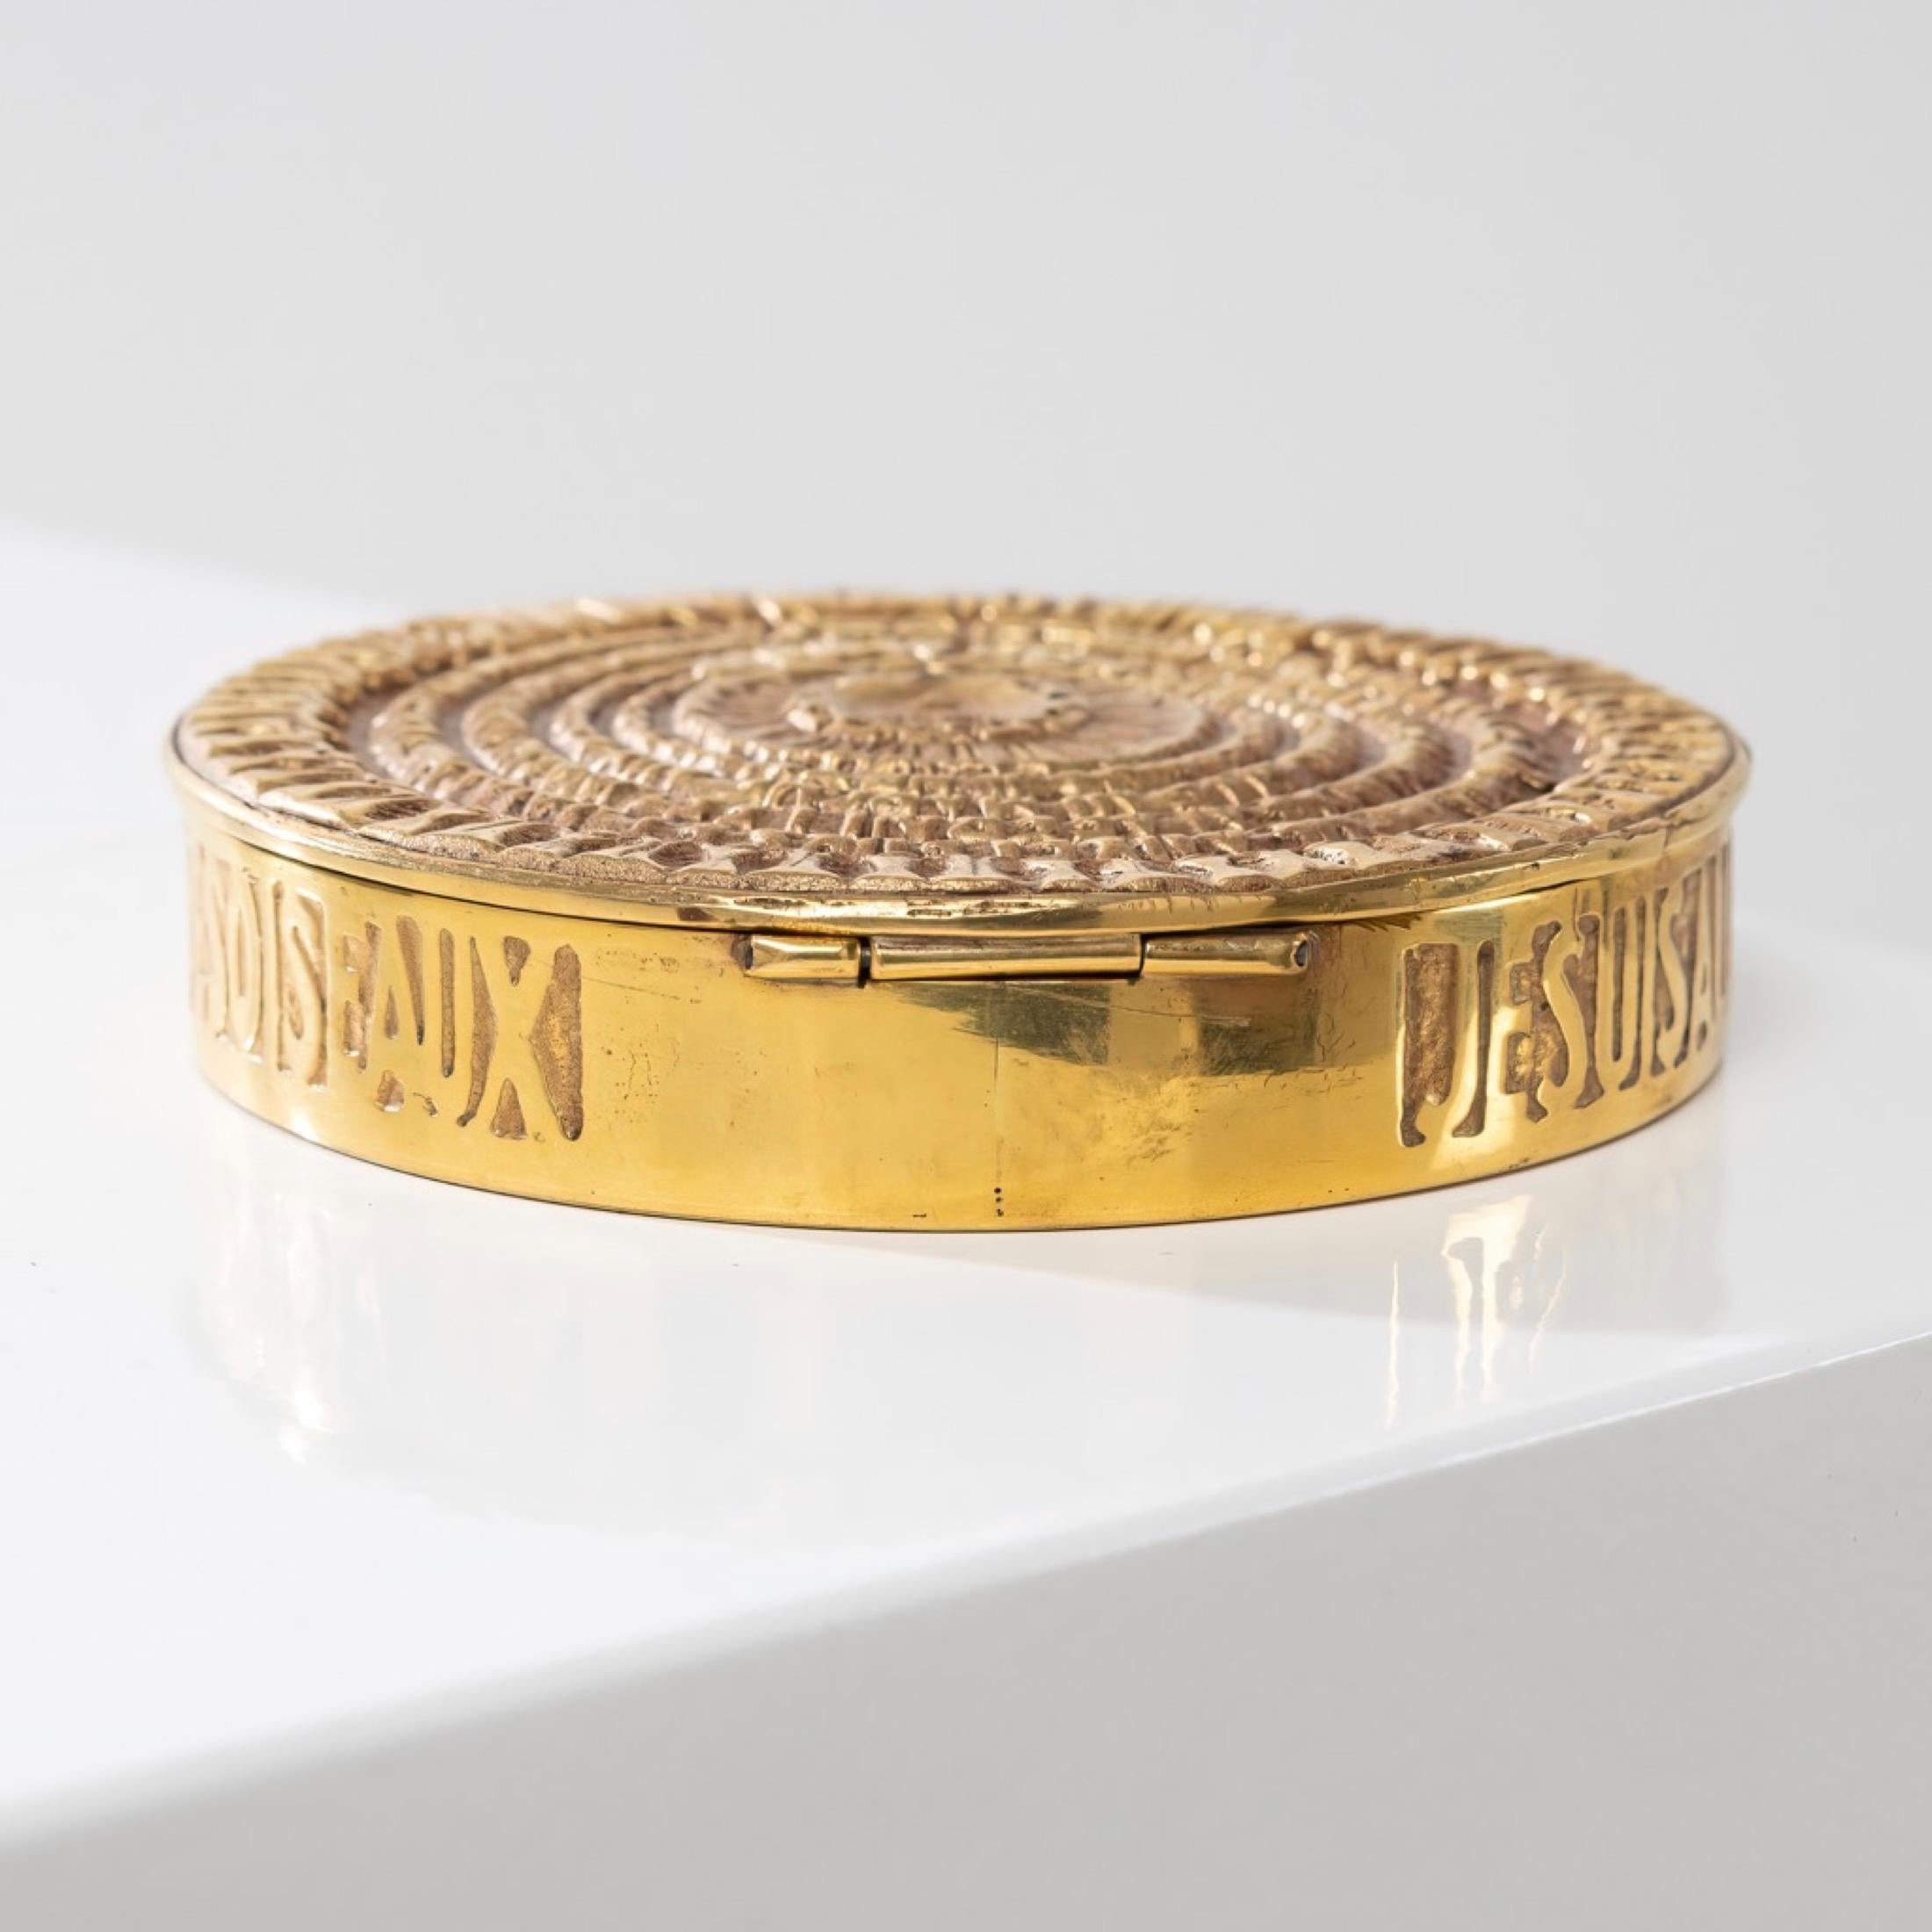 Bronze Pour toi mon Amour (For you my love) by Line Vautrin – Gilt bronze compact